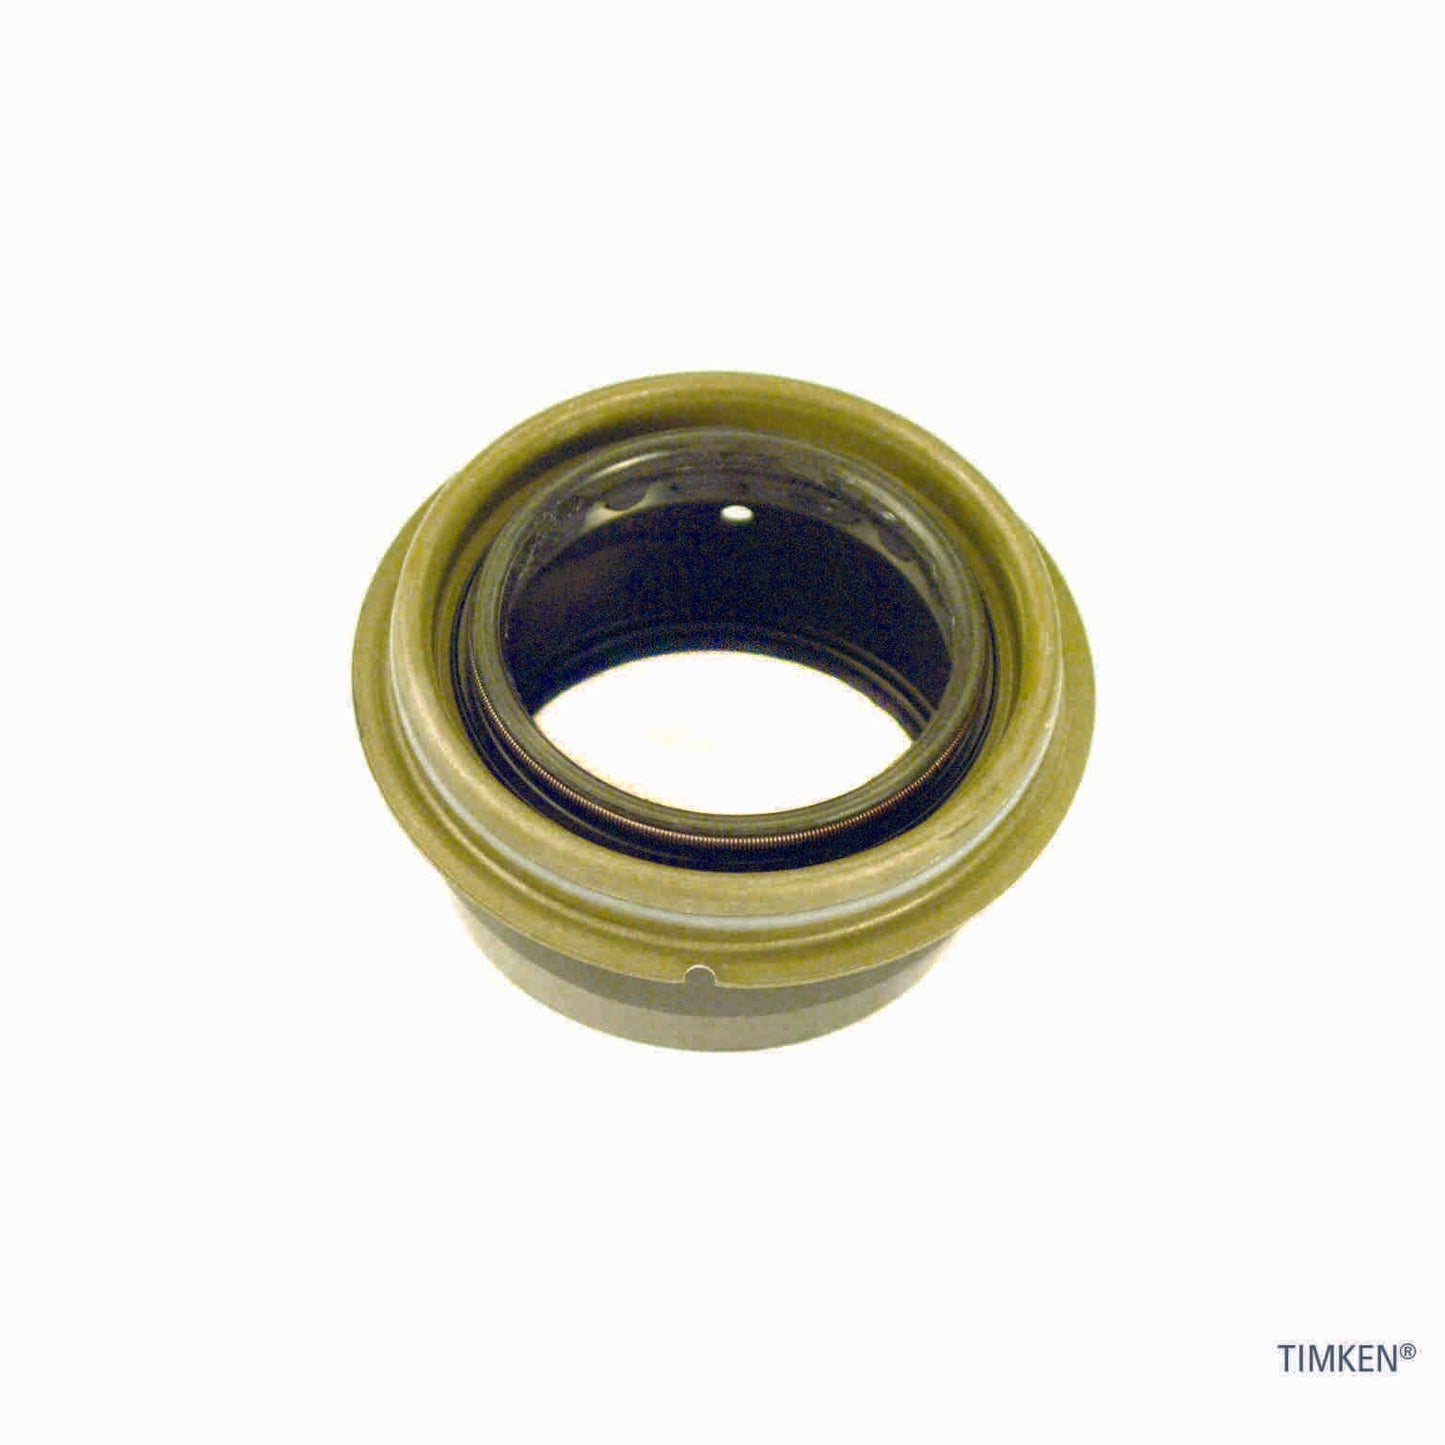 Back View of Automatic Transmission Output Shaft Seal TIMKEN 710636